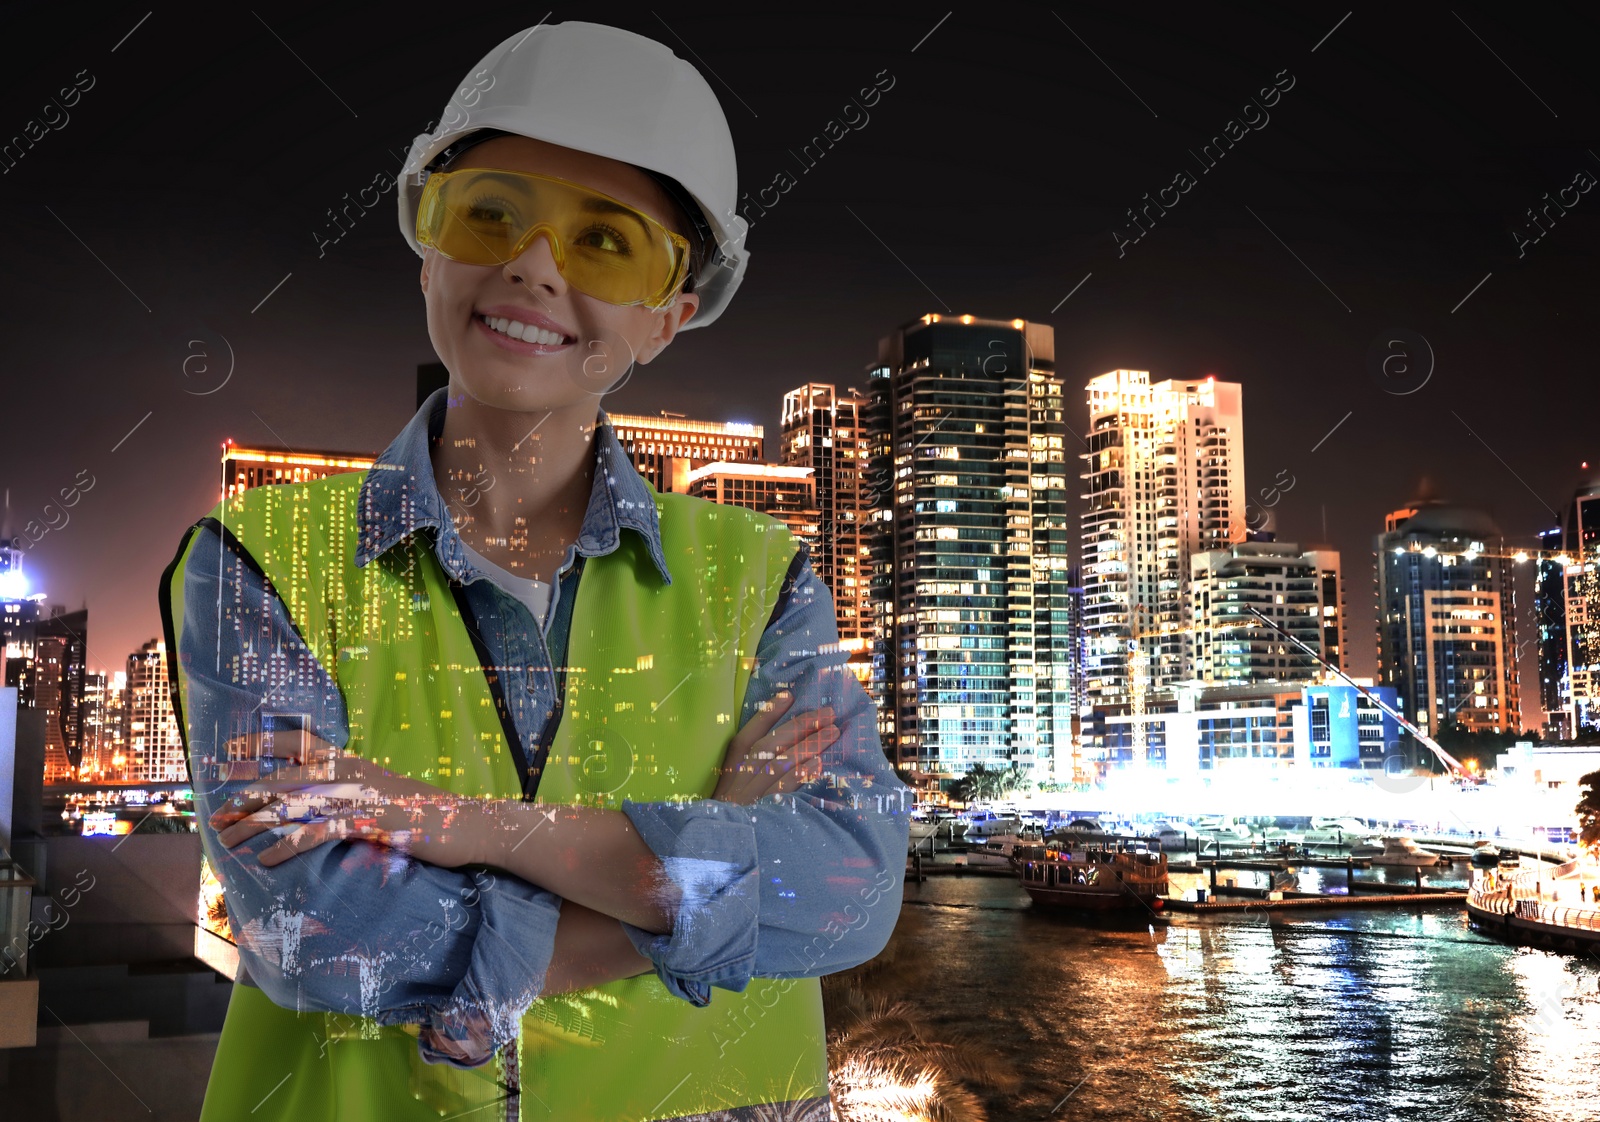 Image of Double exposure of engineer and city at night